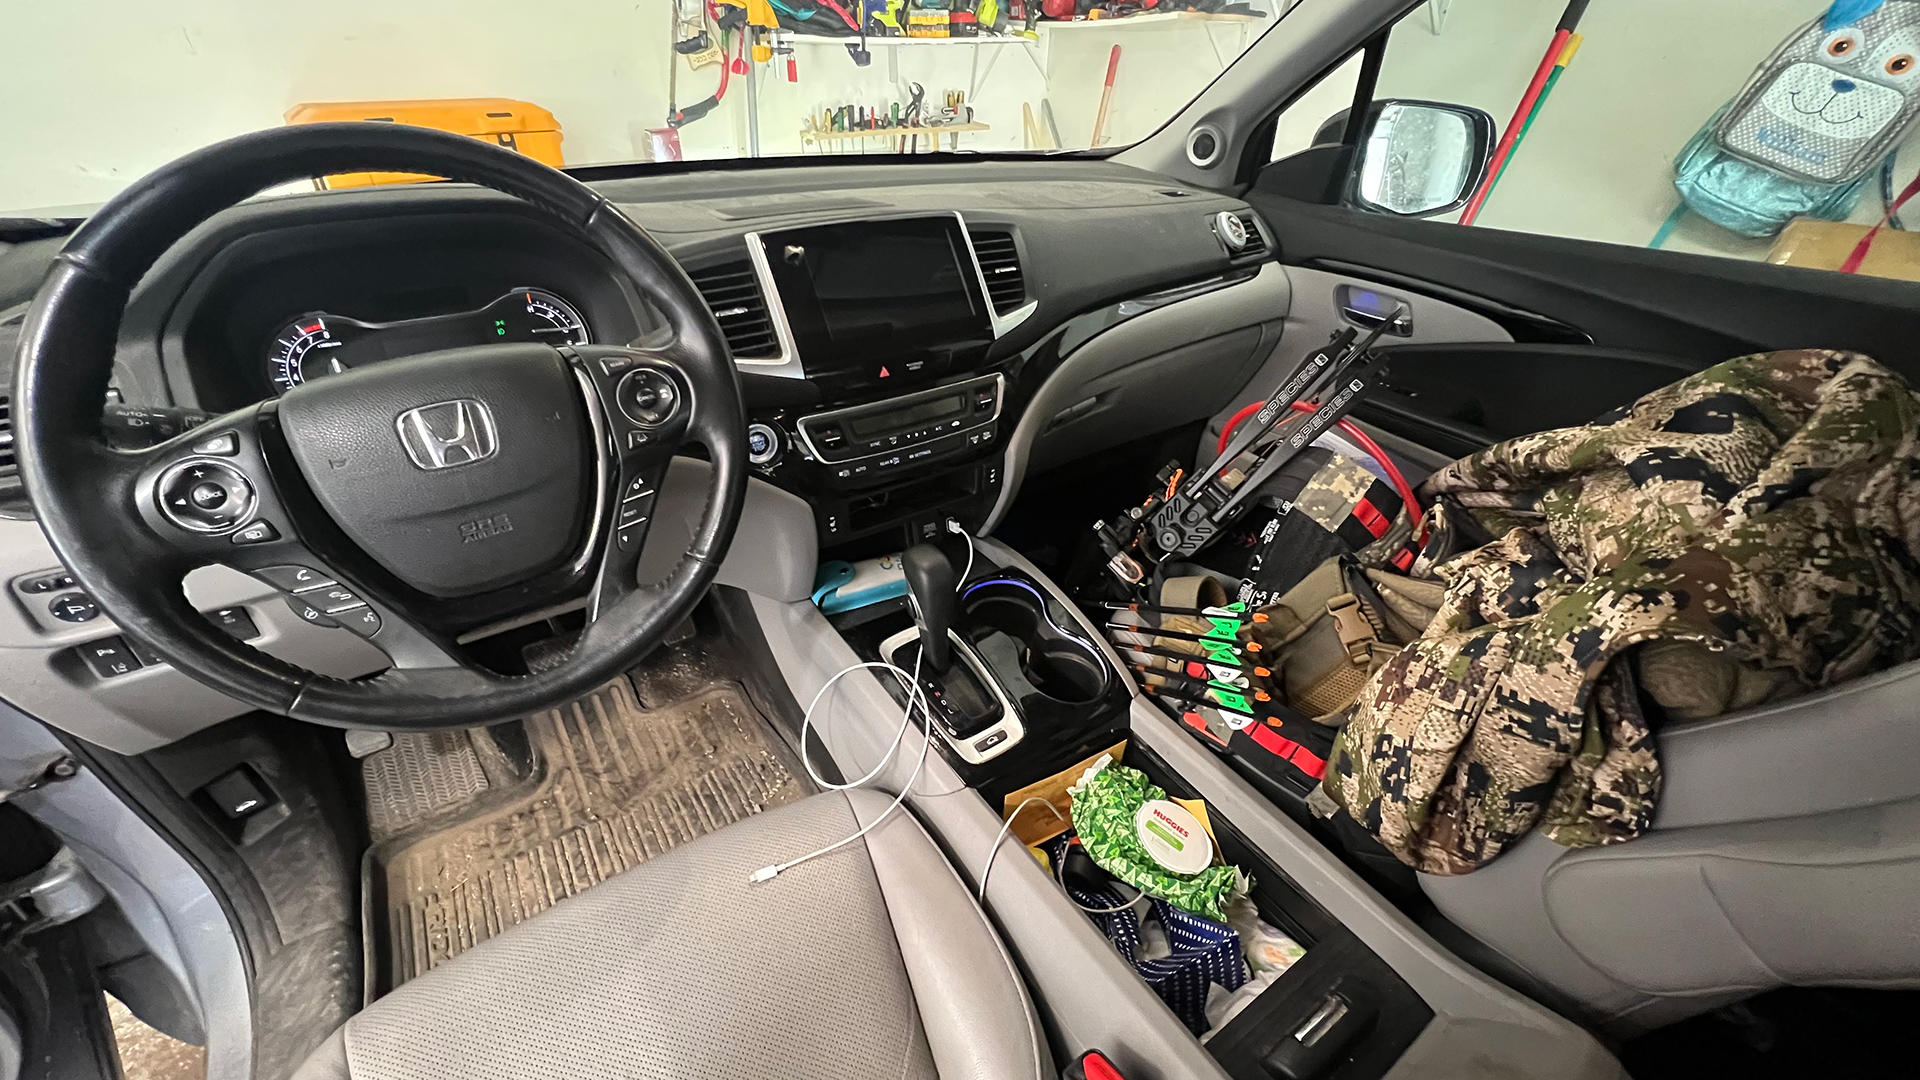 Best Car Interior Cleaners for Maintenance and Mess - Modded